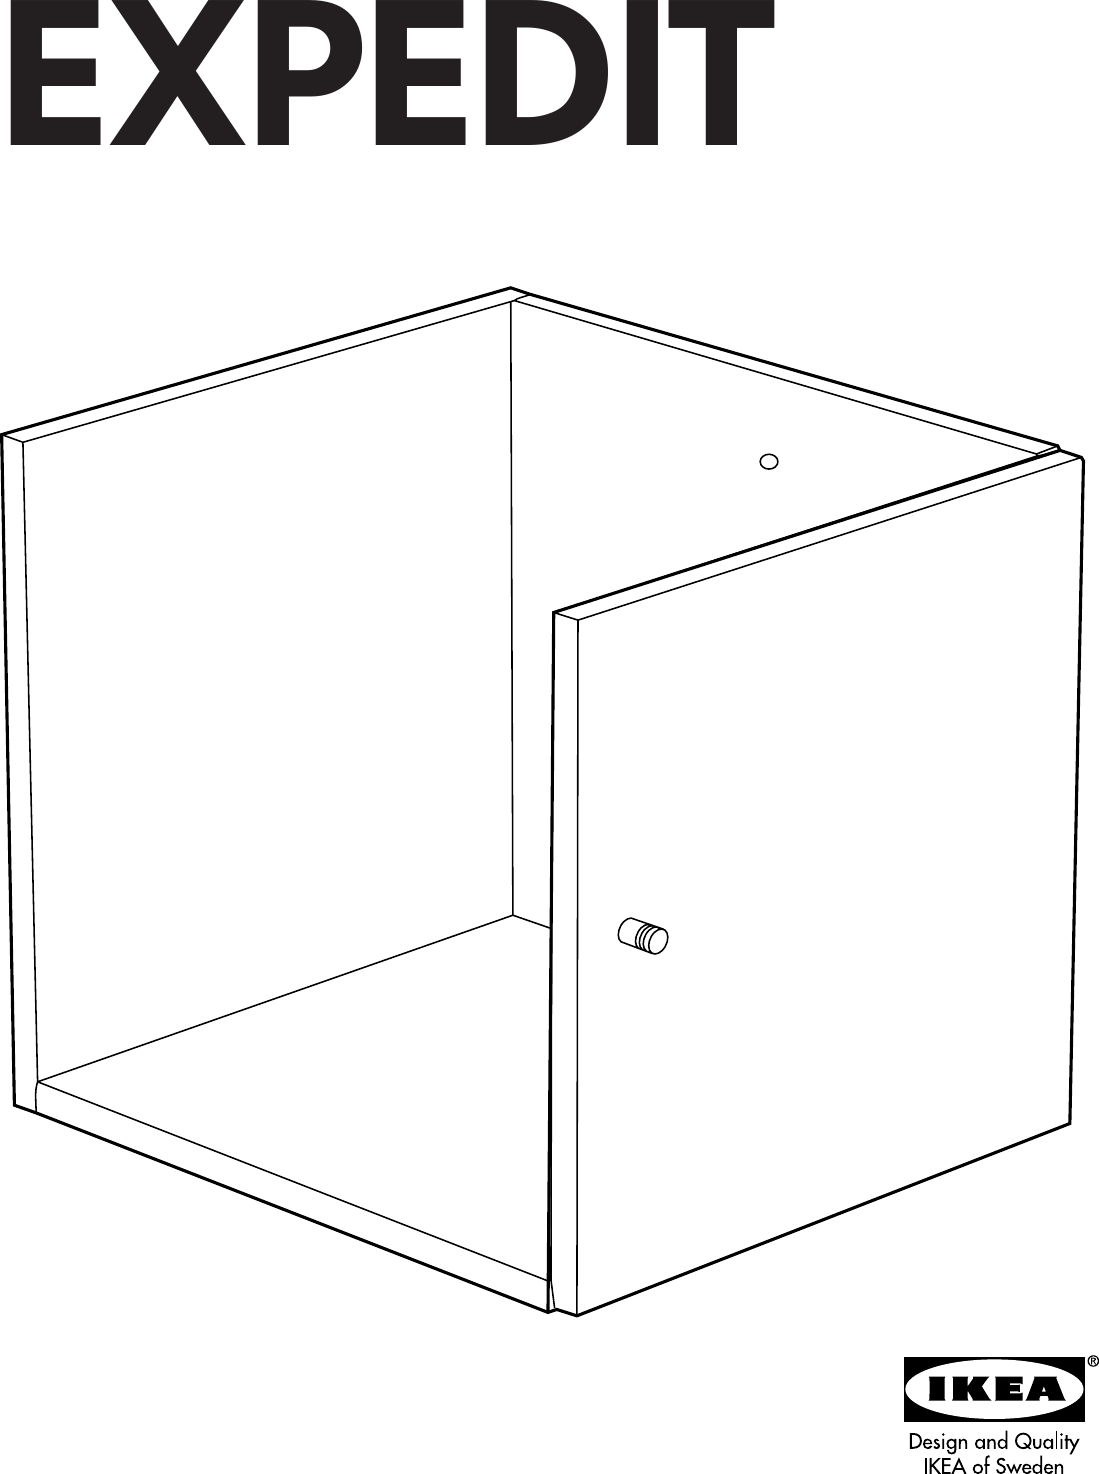 Page 1 of 12 - Ikea Ikea-Expedit-Insert-Door-13X13-Assembly-Instruction